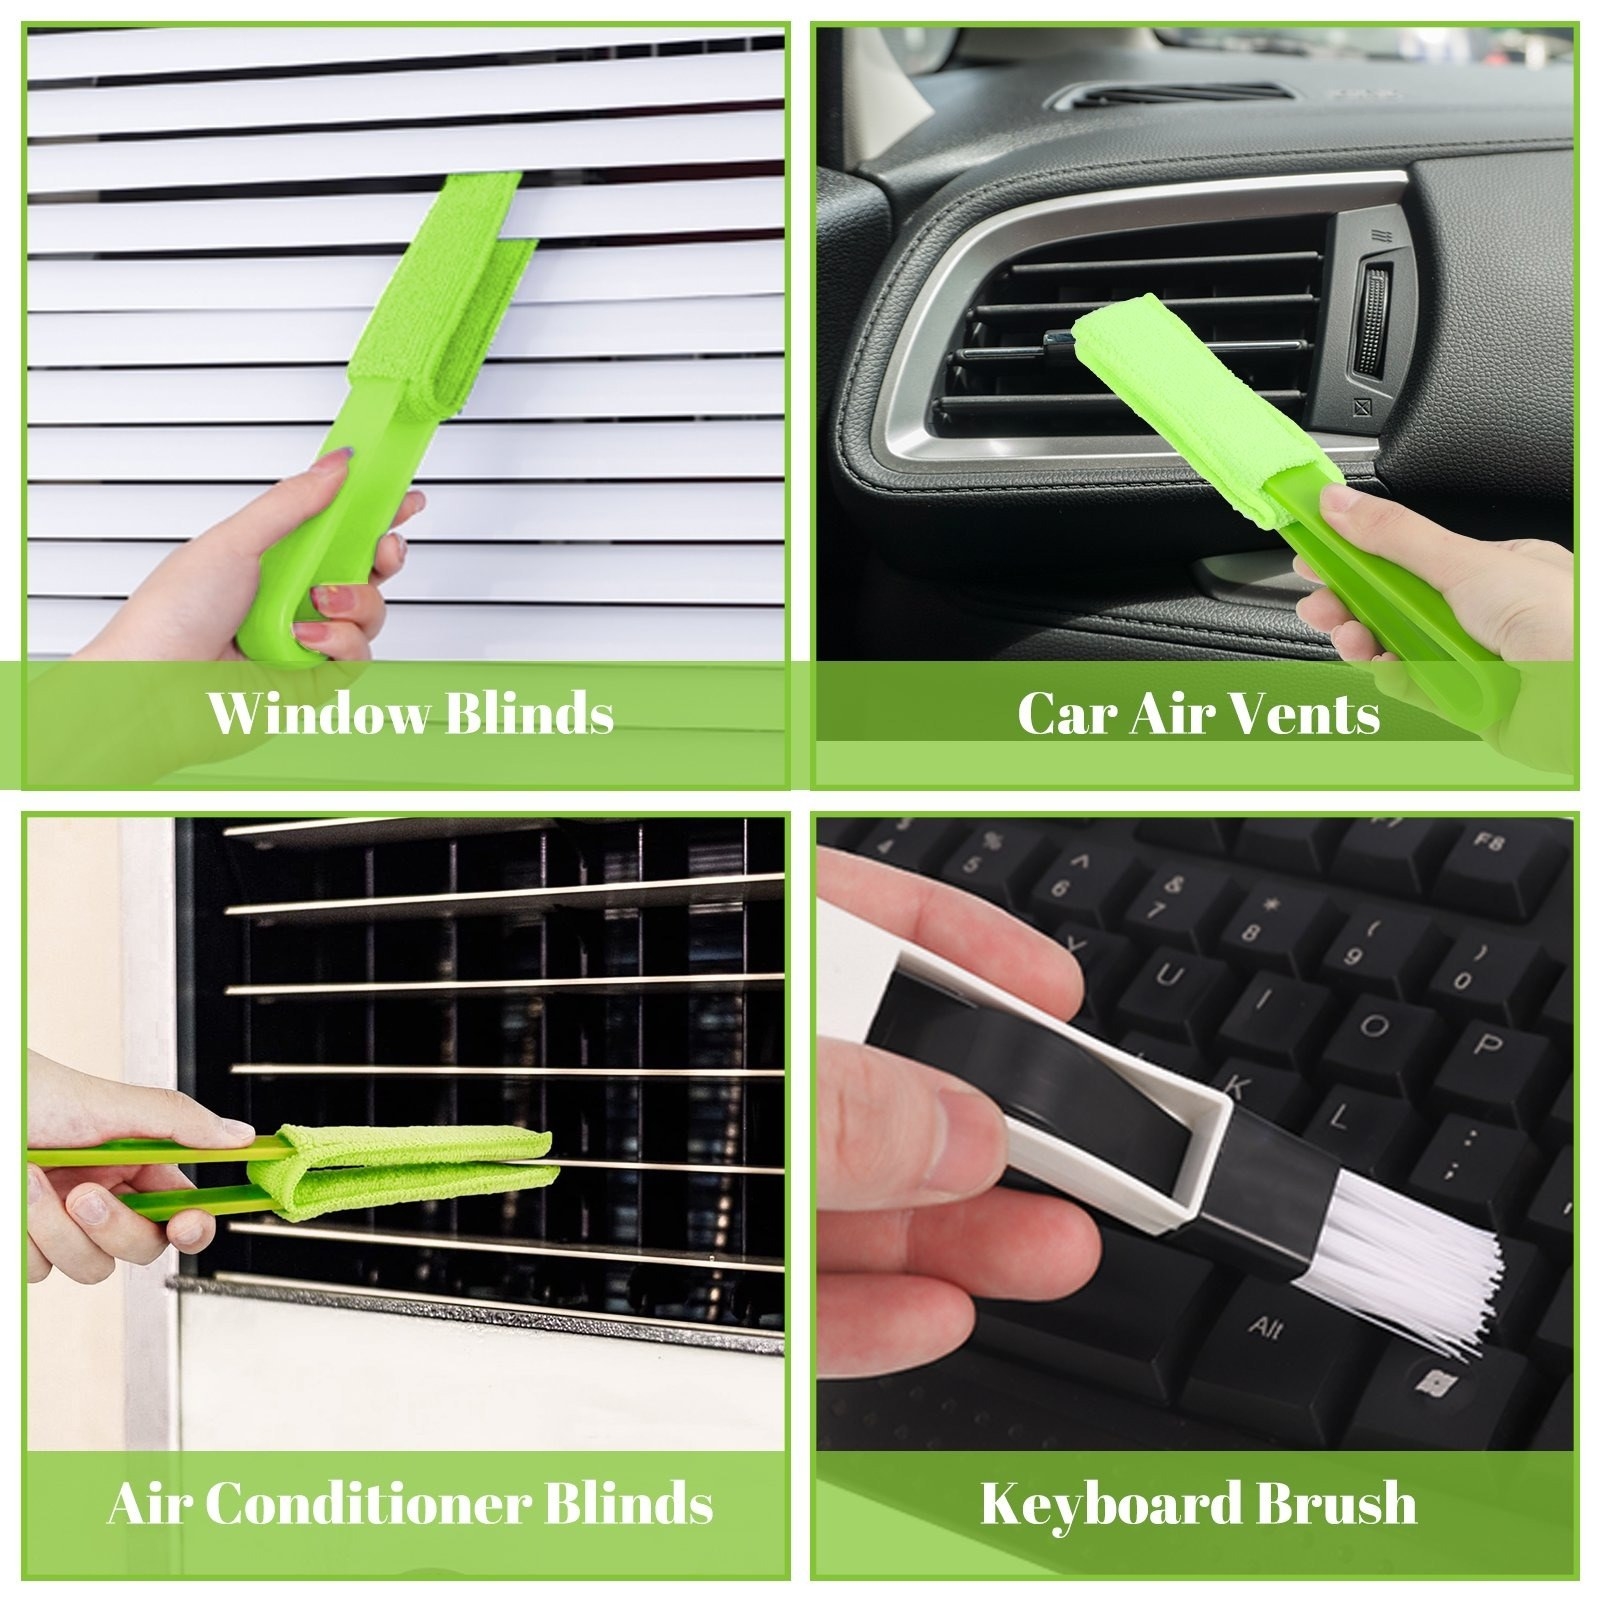 the cleaner being used on window blinds, car air vents, air conditioner blinds, and a keyboard